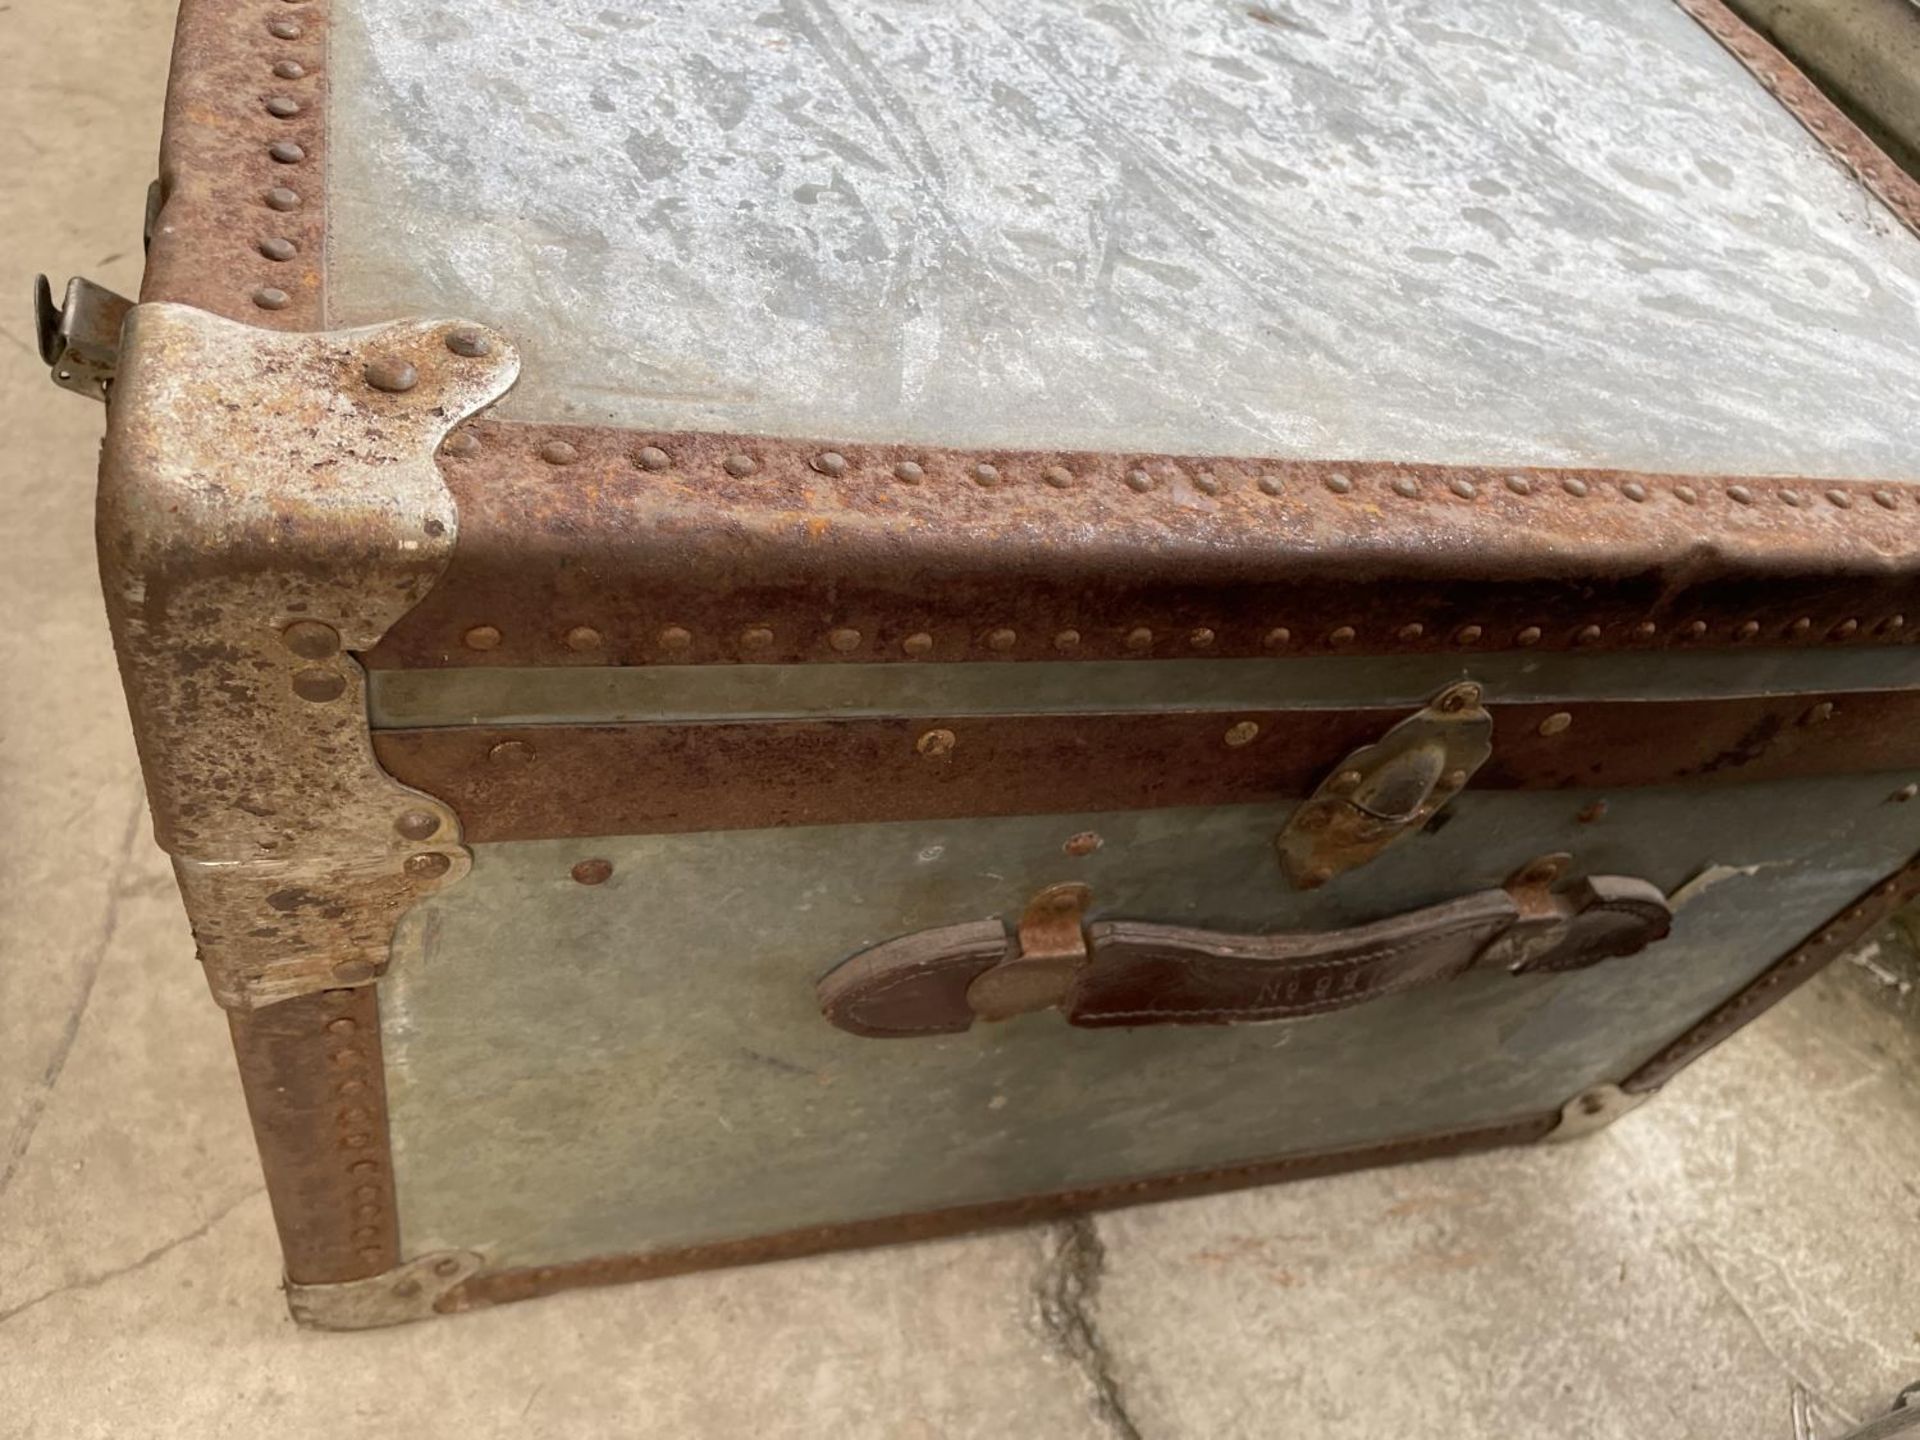 A SUBSTANTIAL GALVANISED METAL TRAVELLING TRUNK, 40X21" - Image 4 of 4